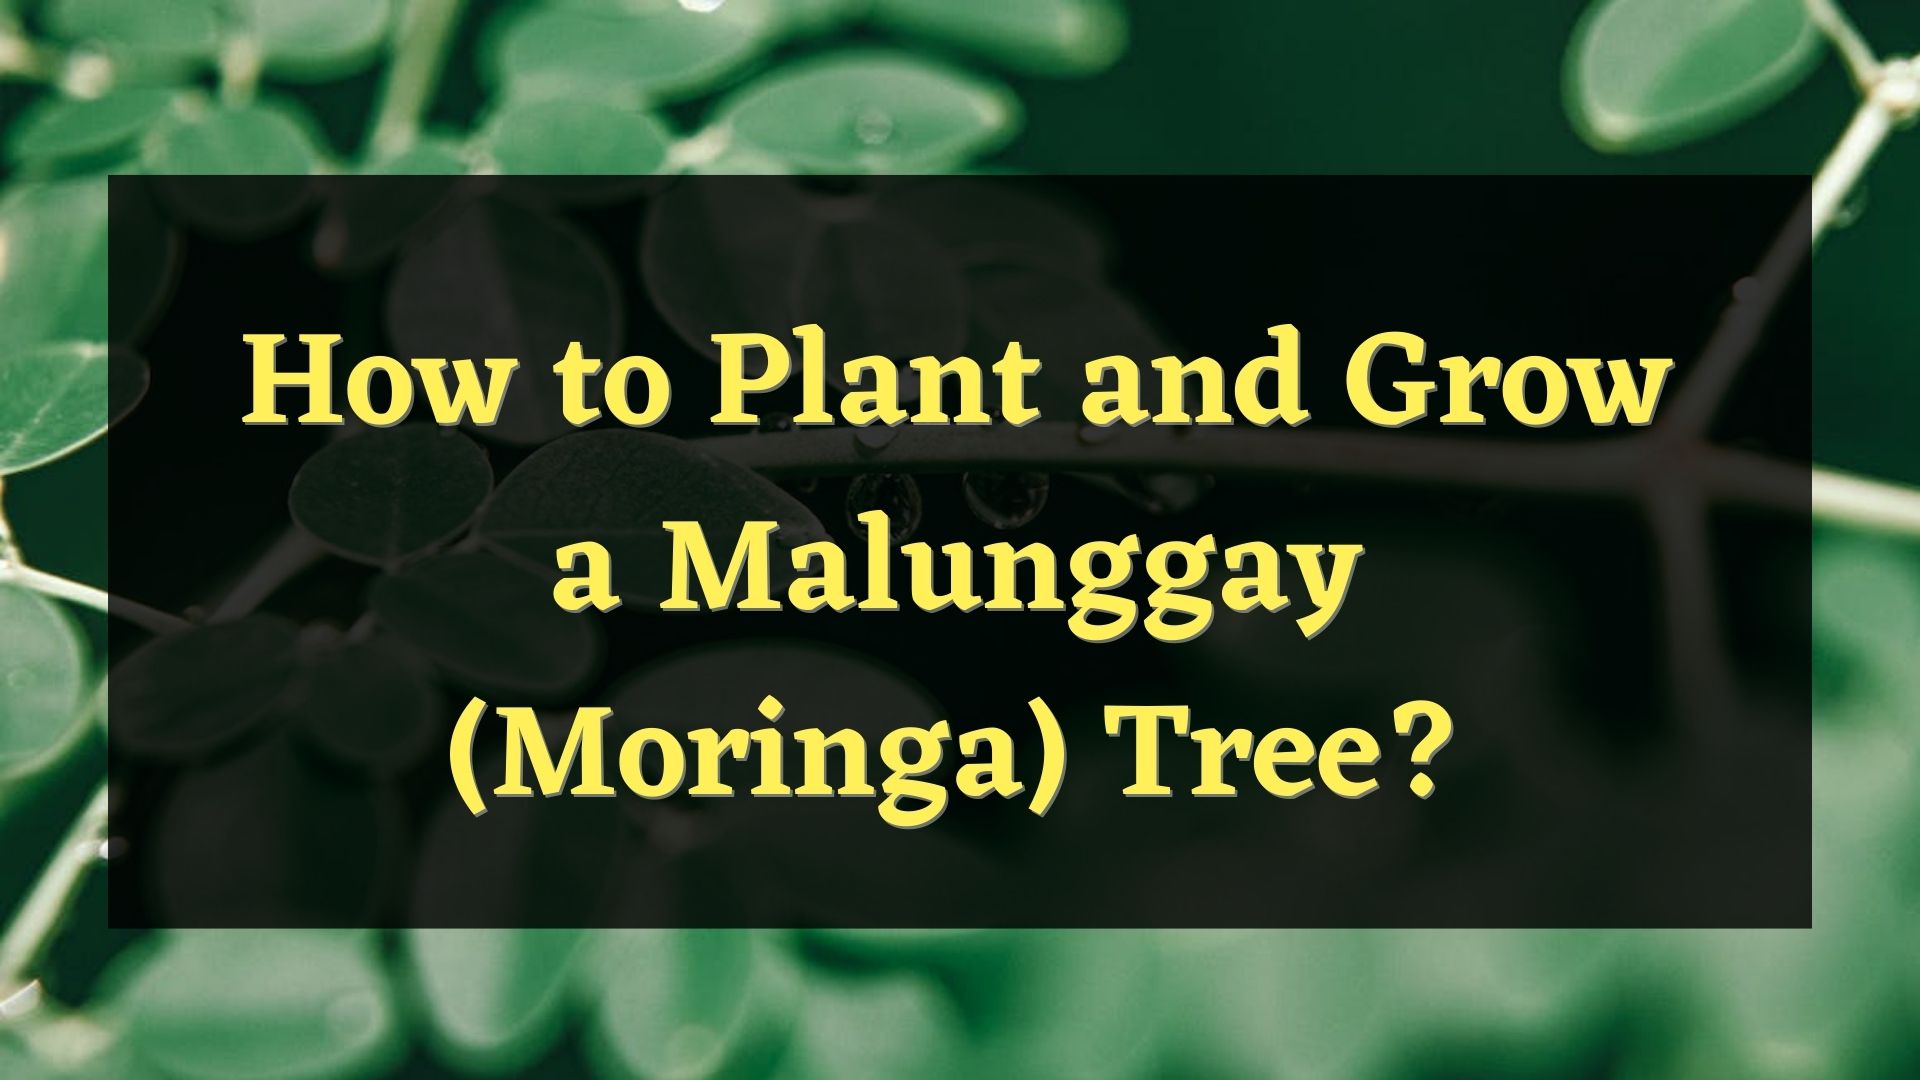 how to plant and grow malunggay tree